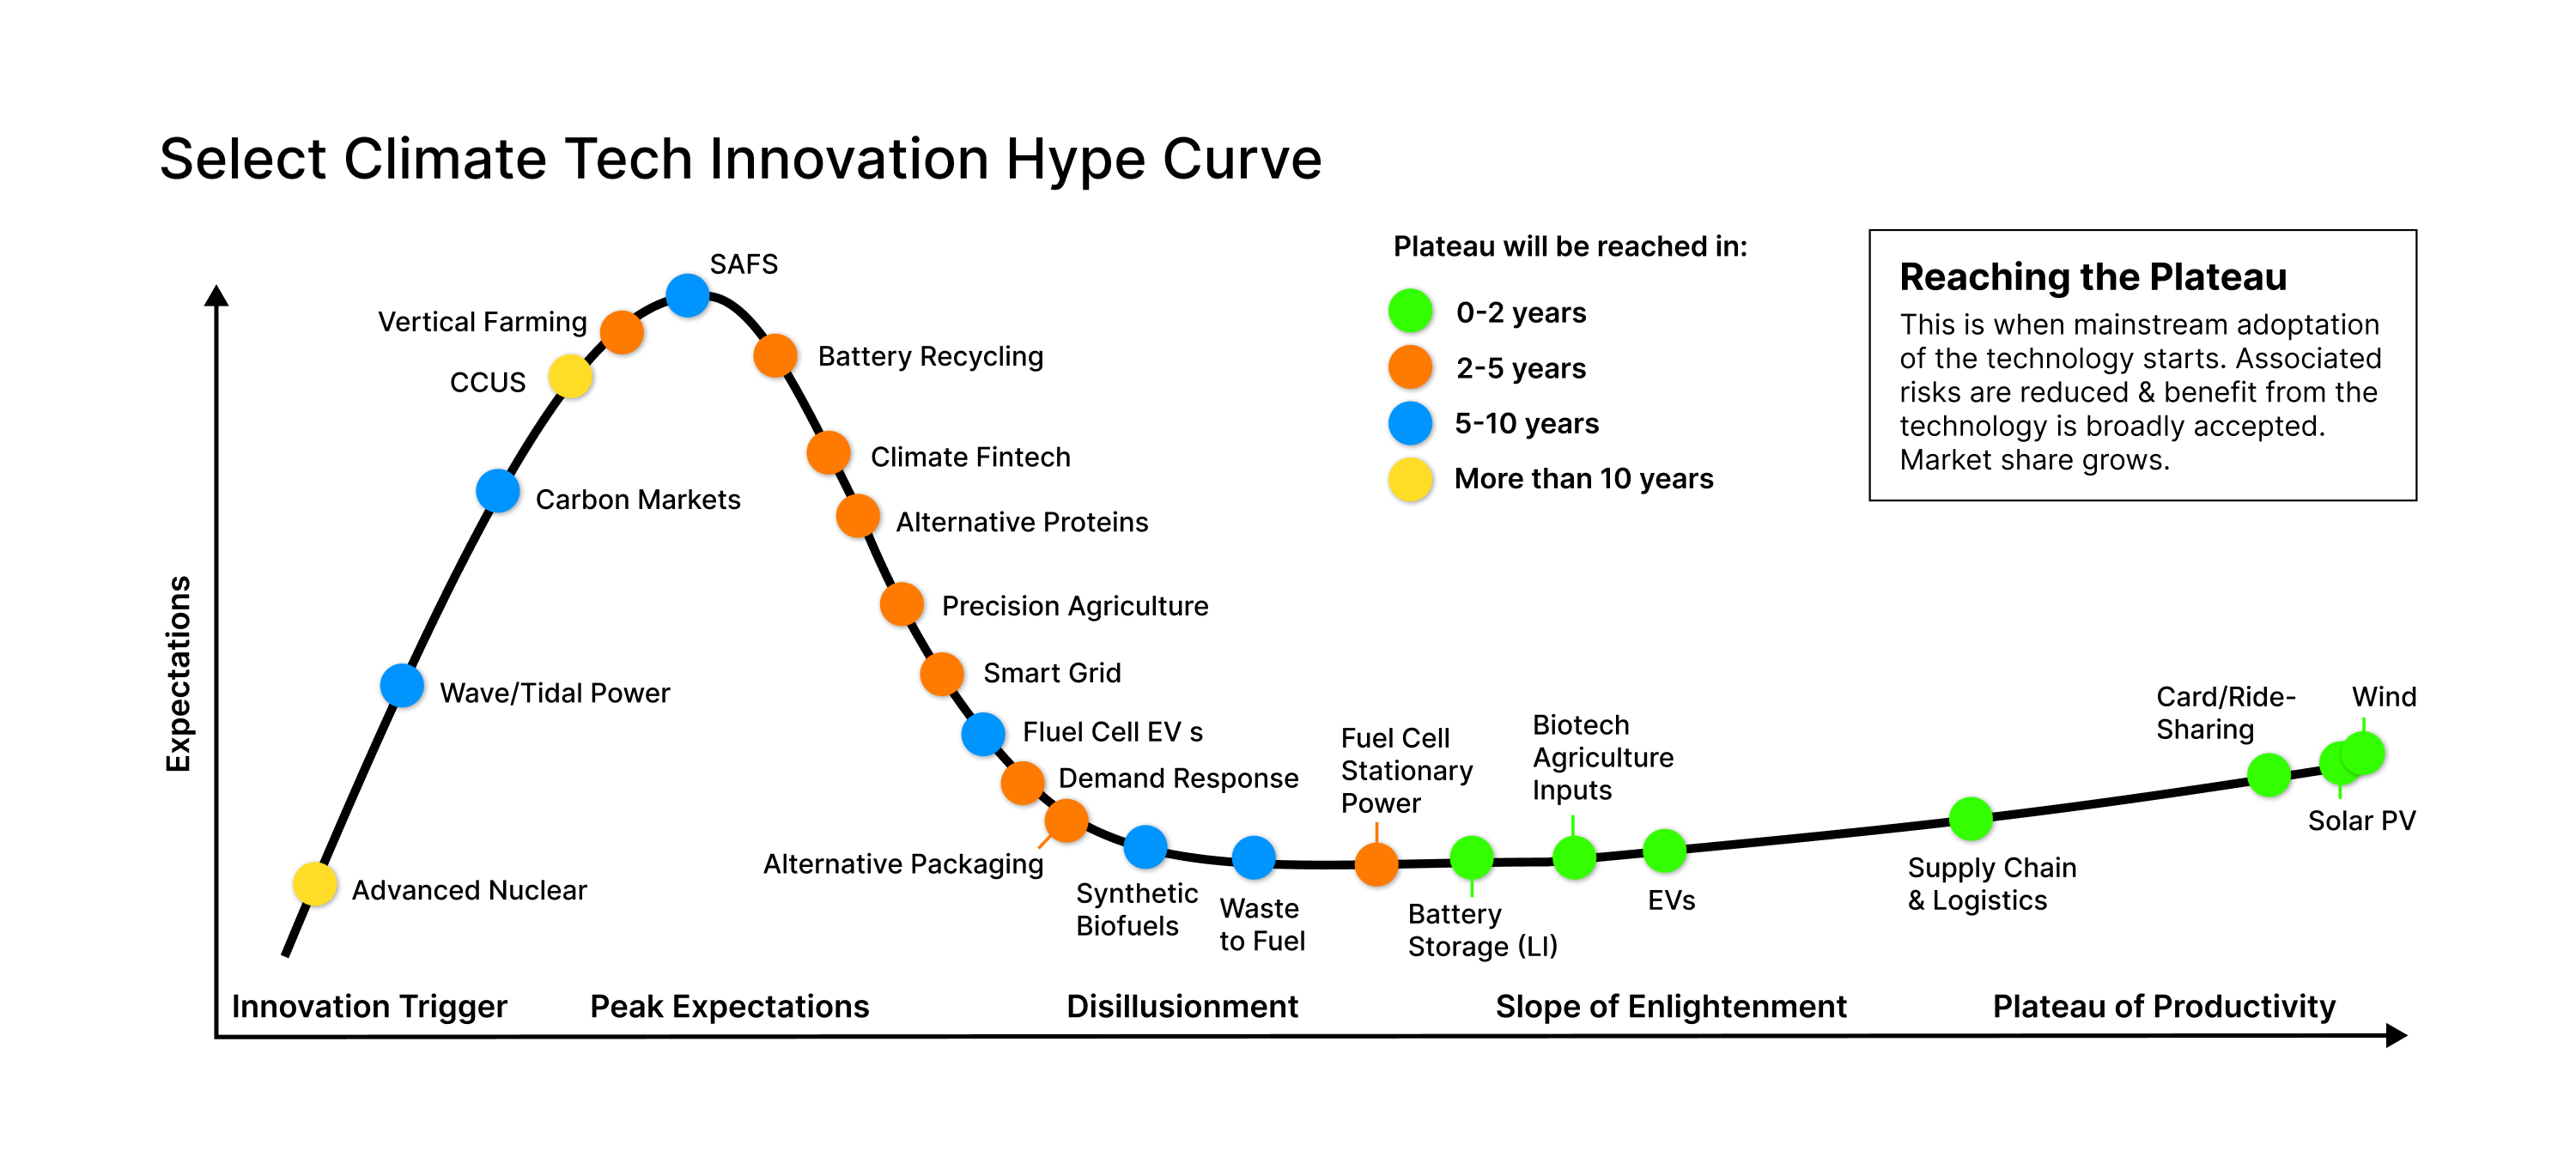  image of a graph representing the climate tech innovation hype curve 